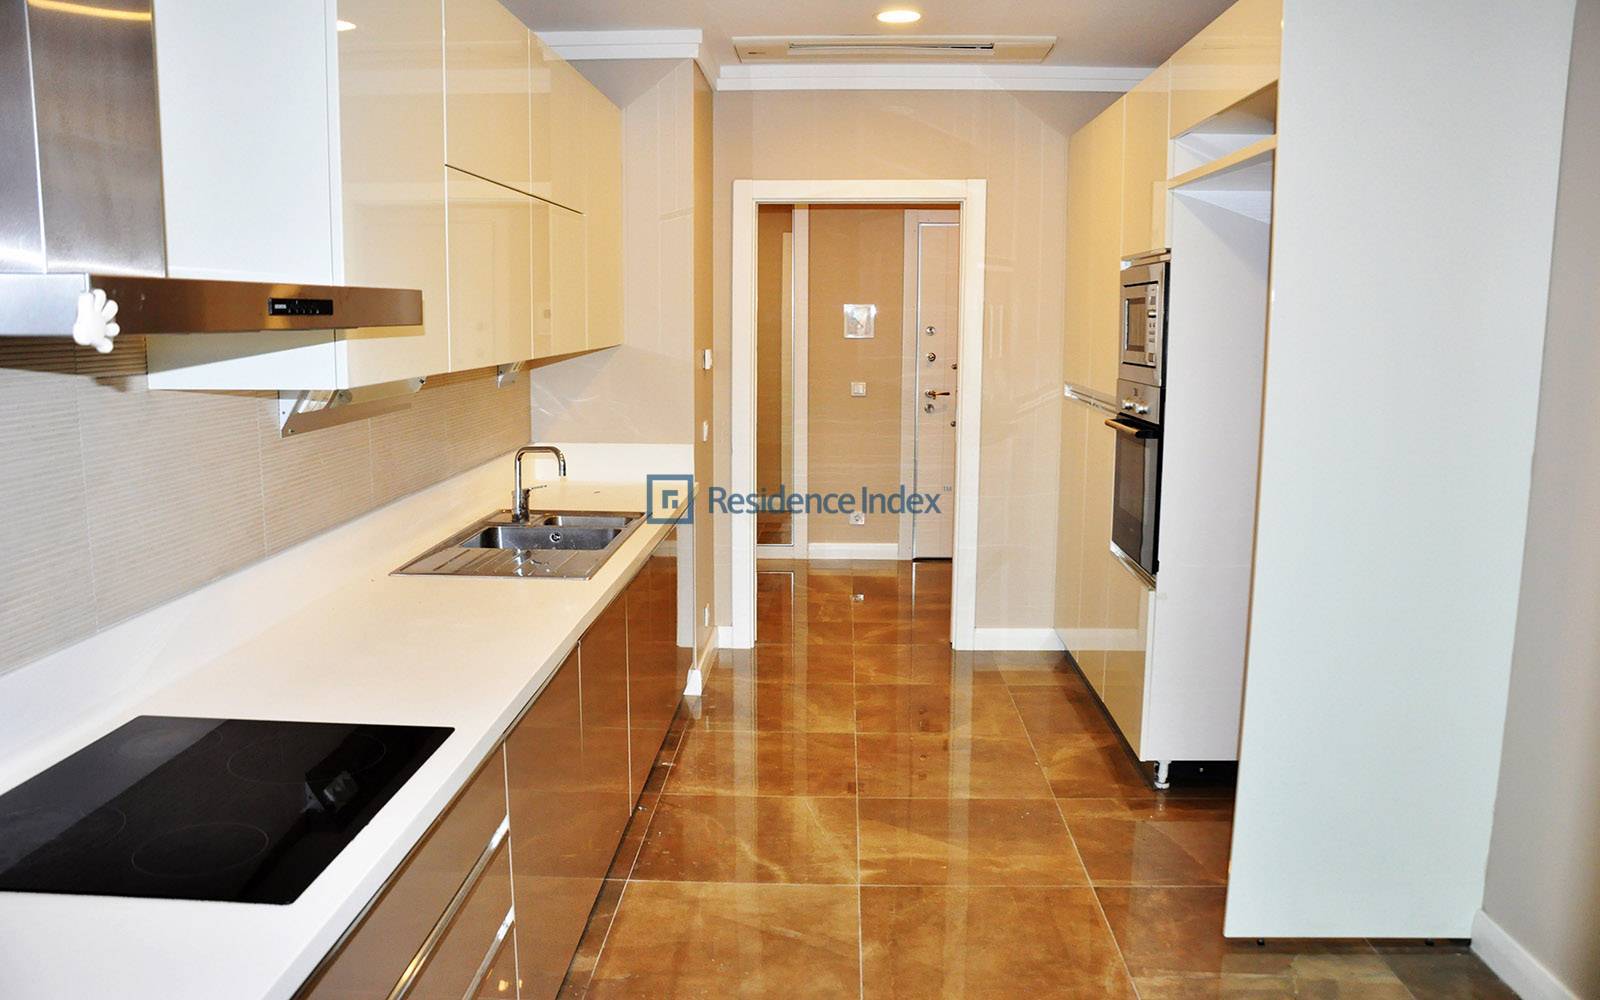 2 + 1 Apartment with Forest View for Sale